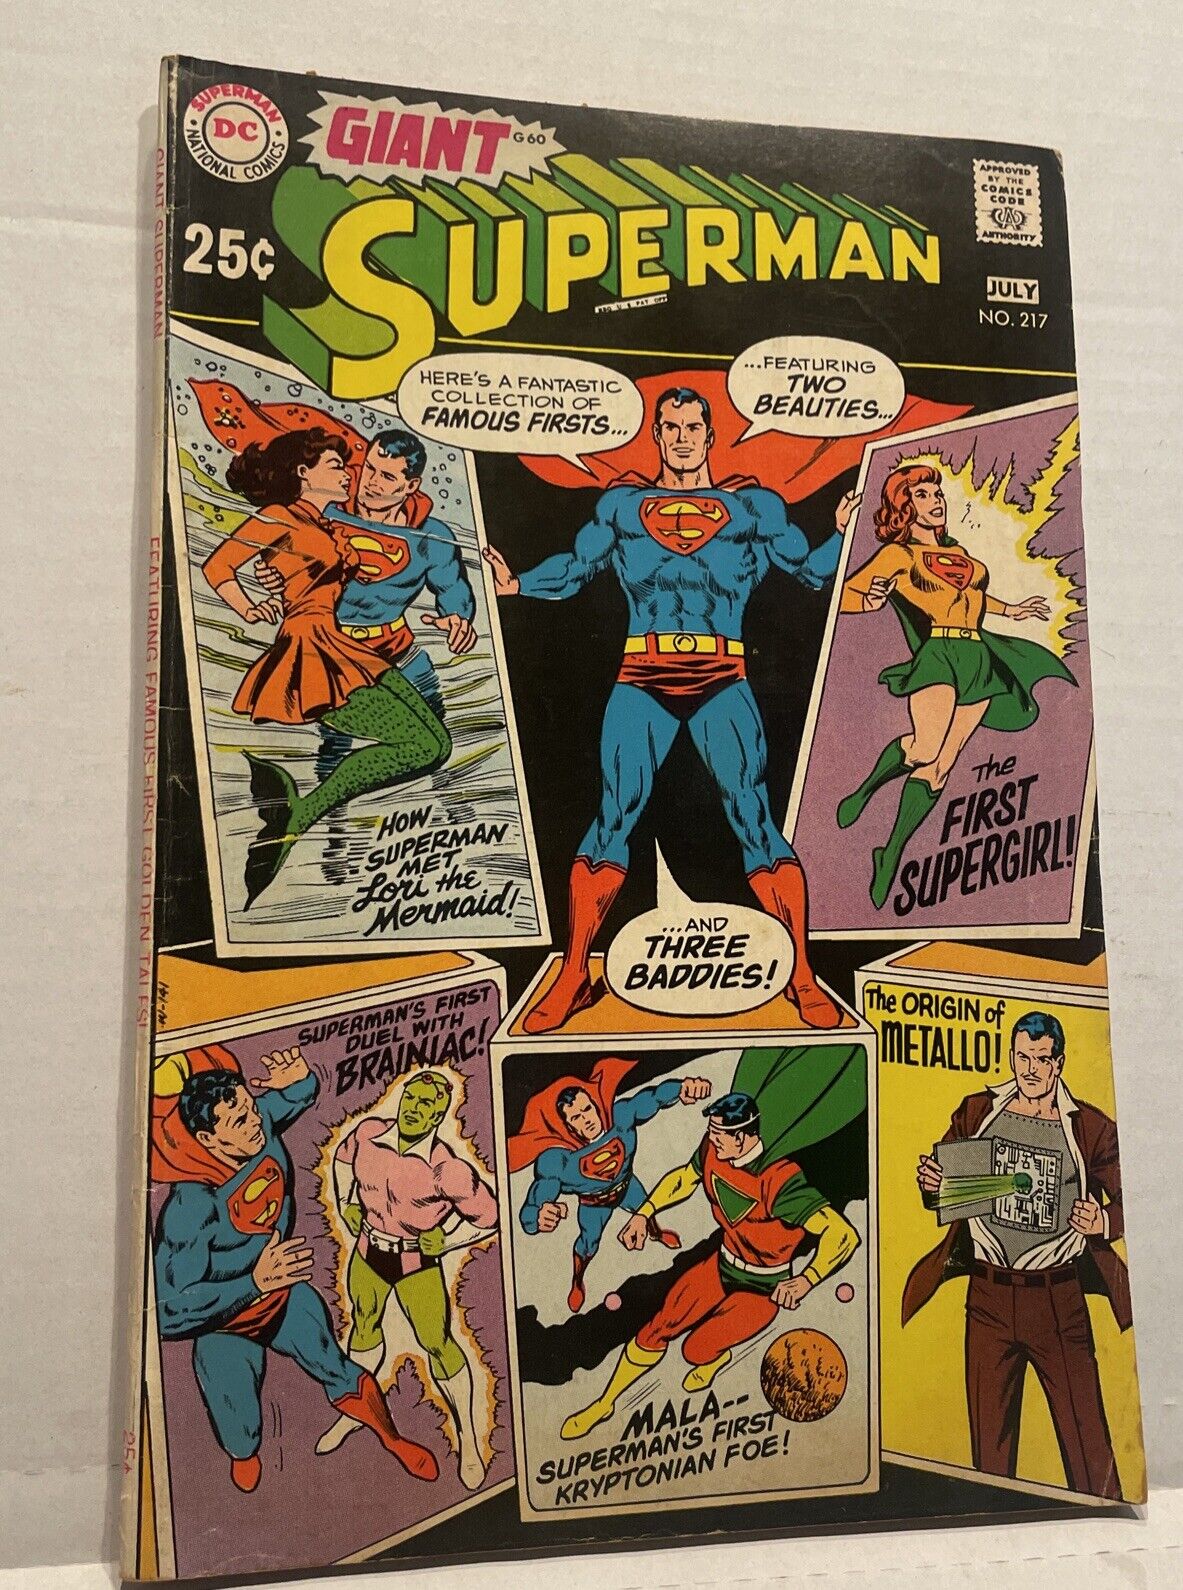 Superman #217 - Jun 1969 - Vol.1 - Giant-Sized Issue   very high grade clean